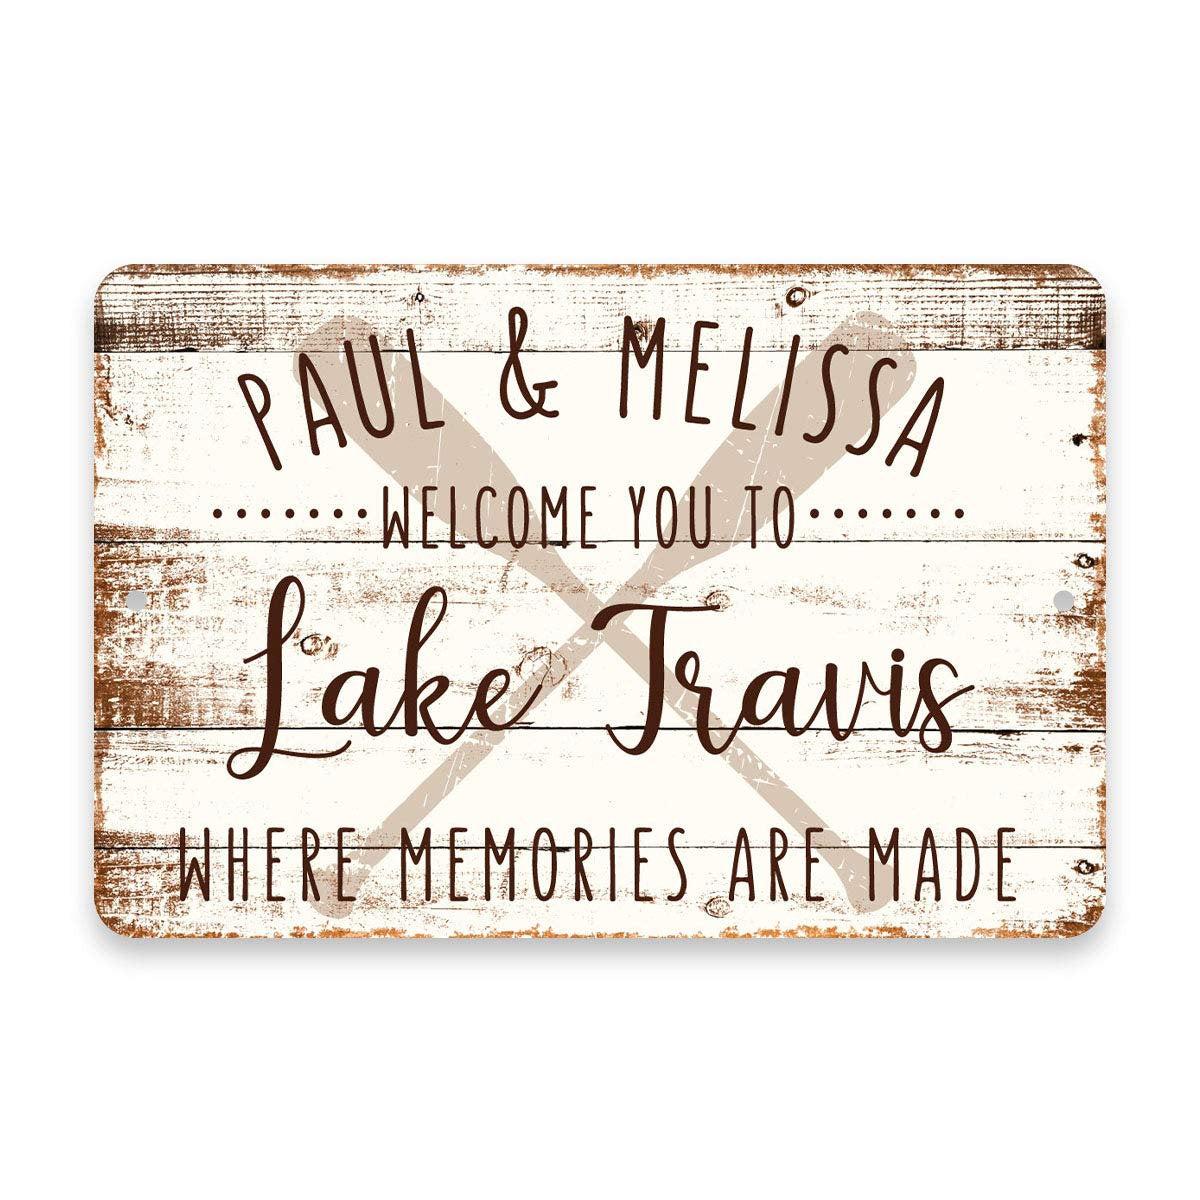 Personalized Welcome to Lake Travis Where Memories are Made Sign - 8 X 12 Metal Sign with Wood Look